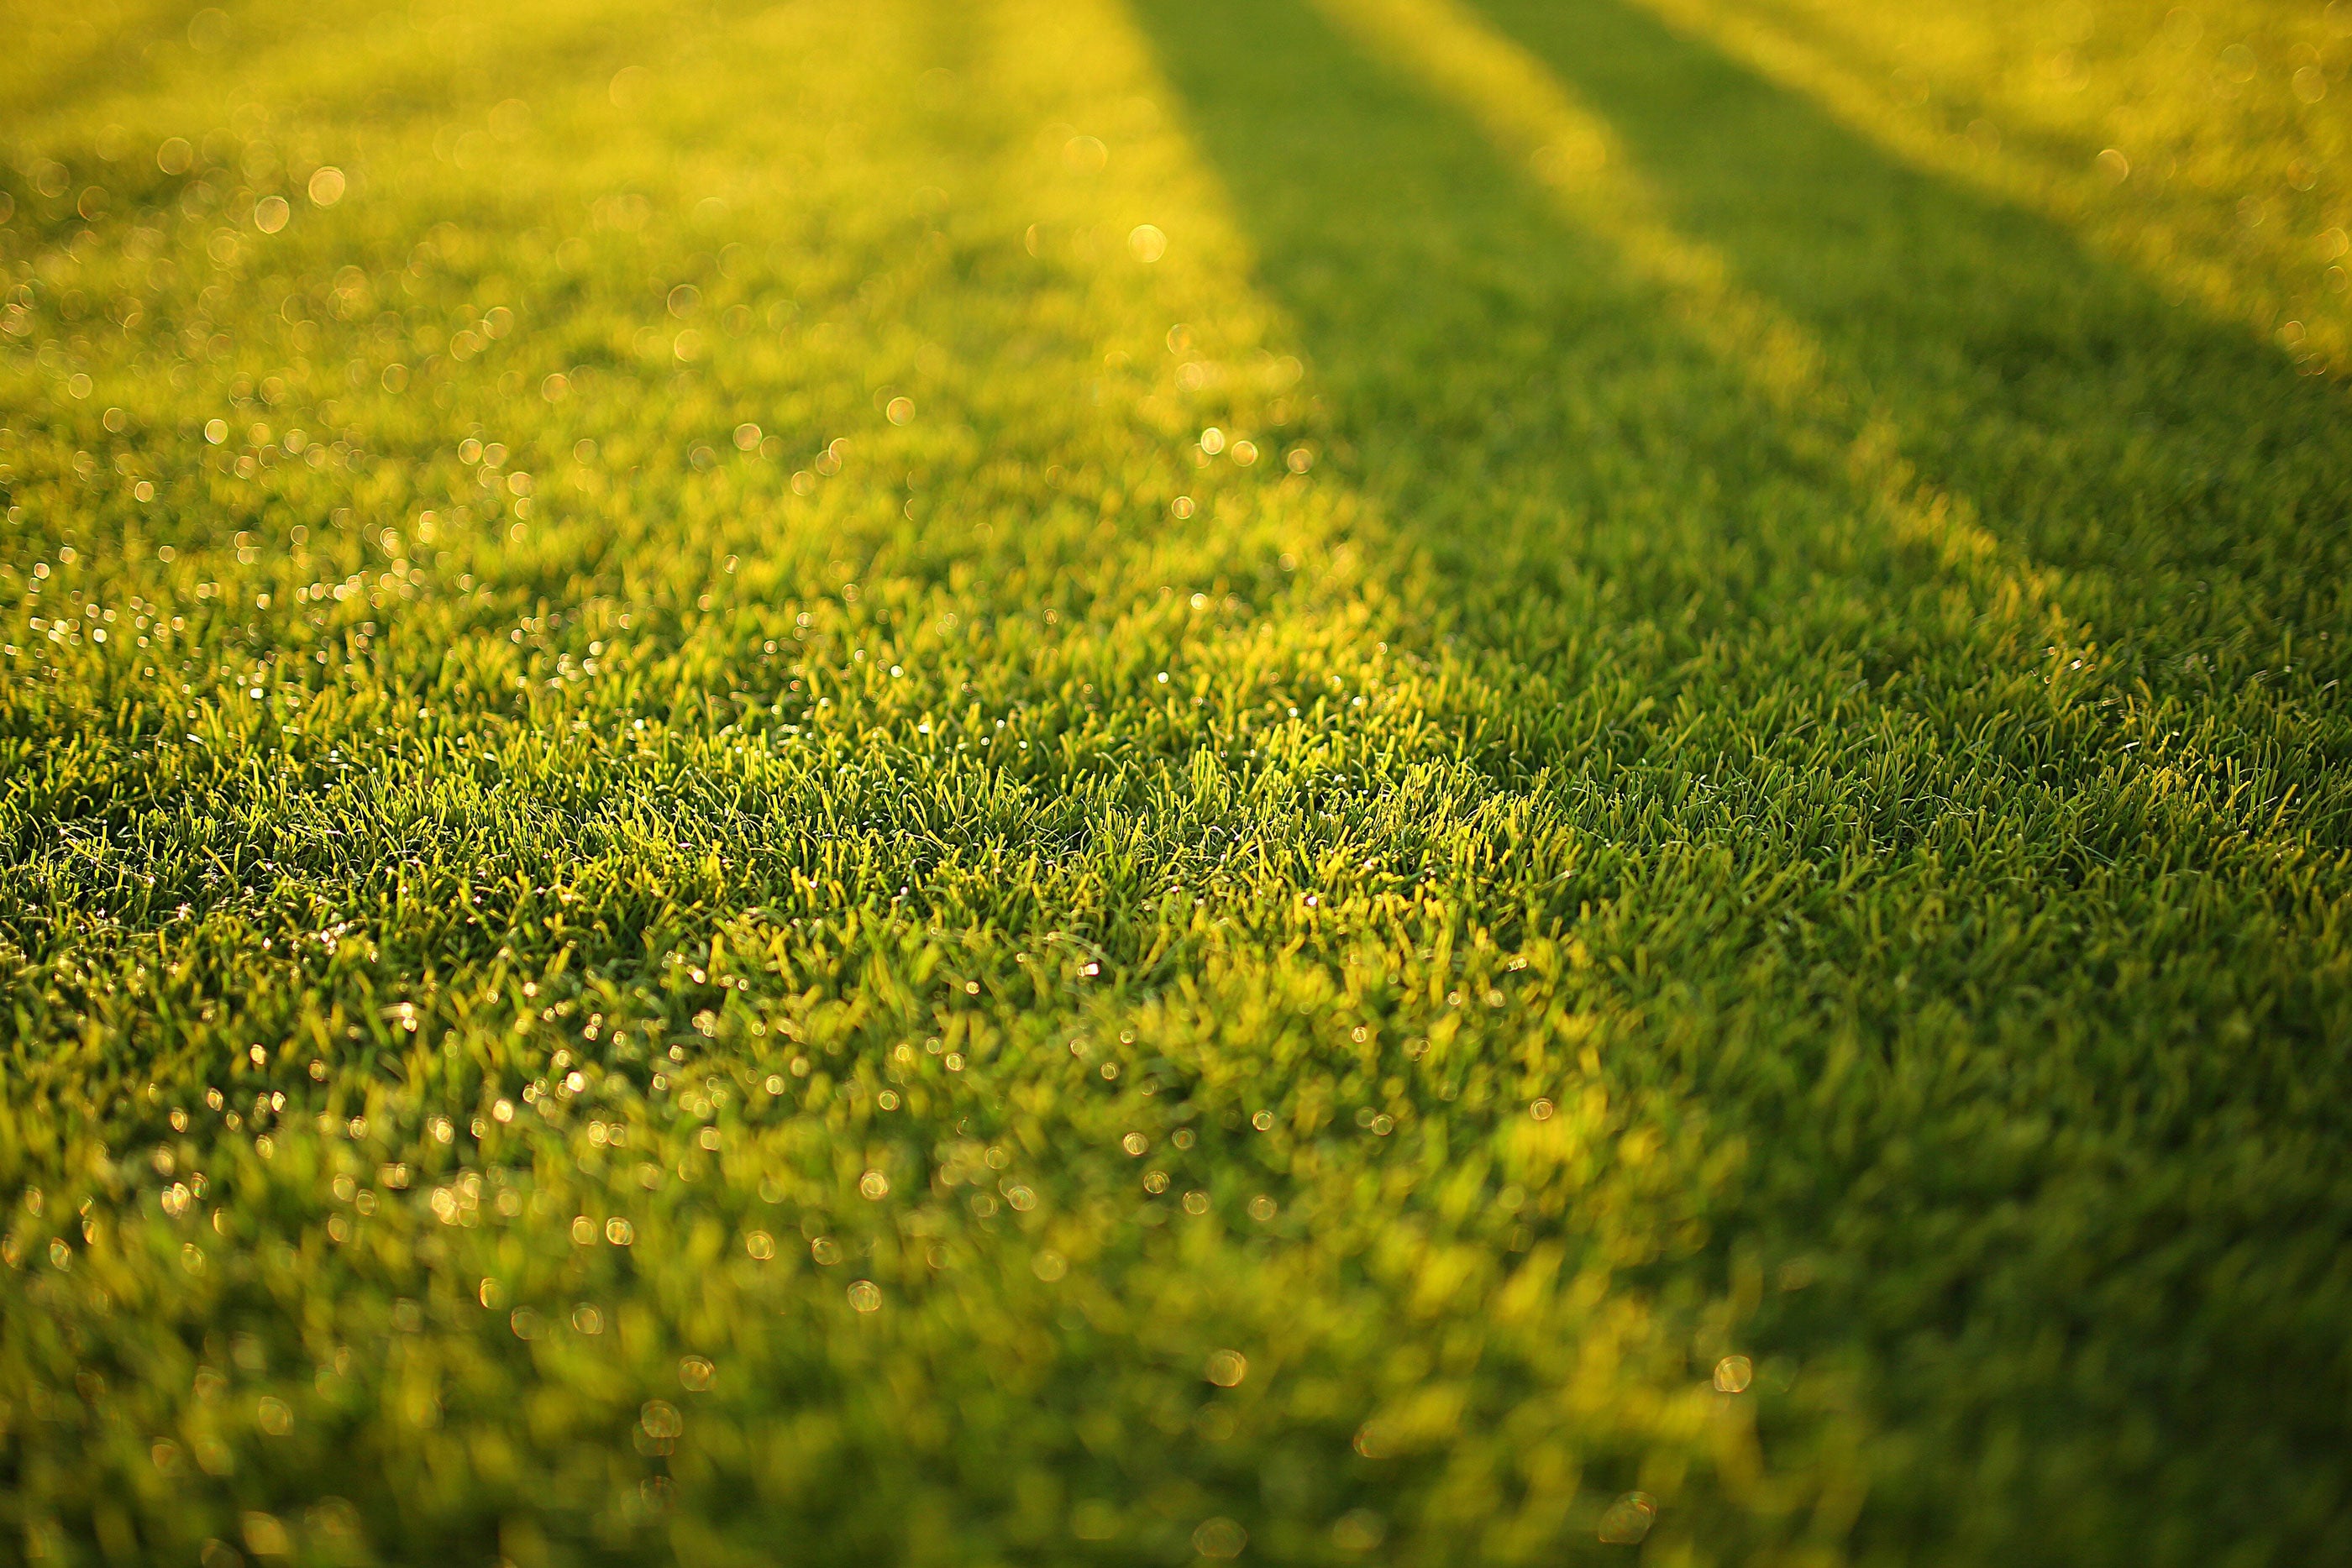 a picture of a lawn